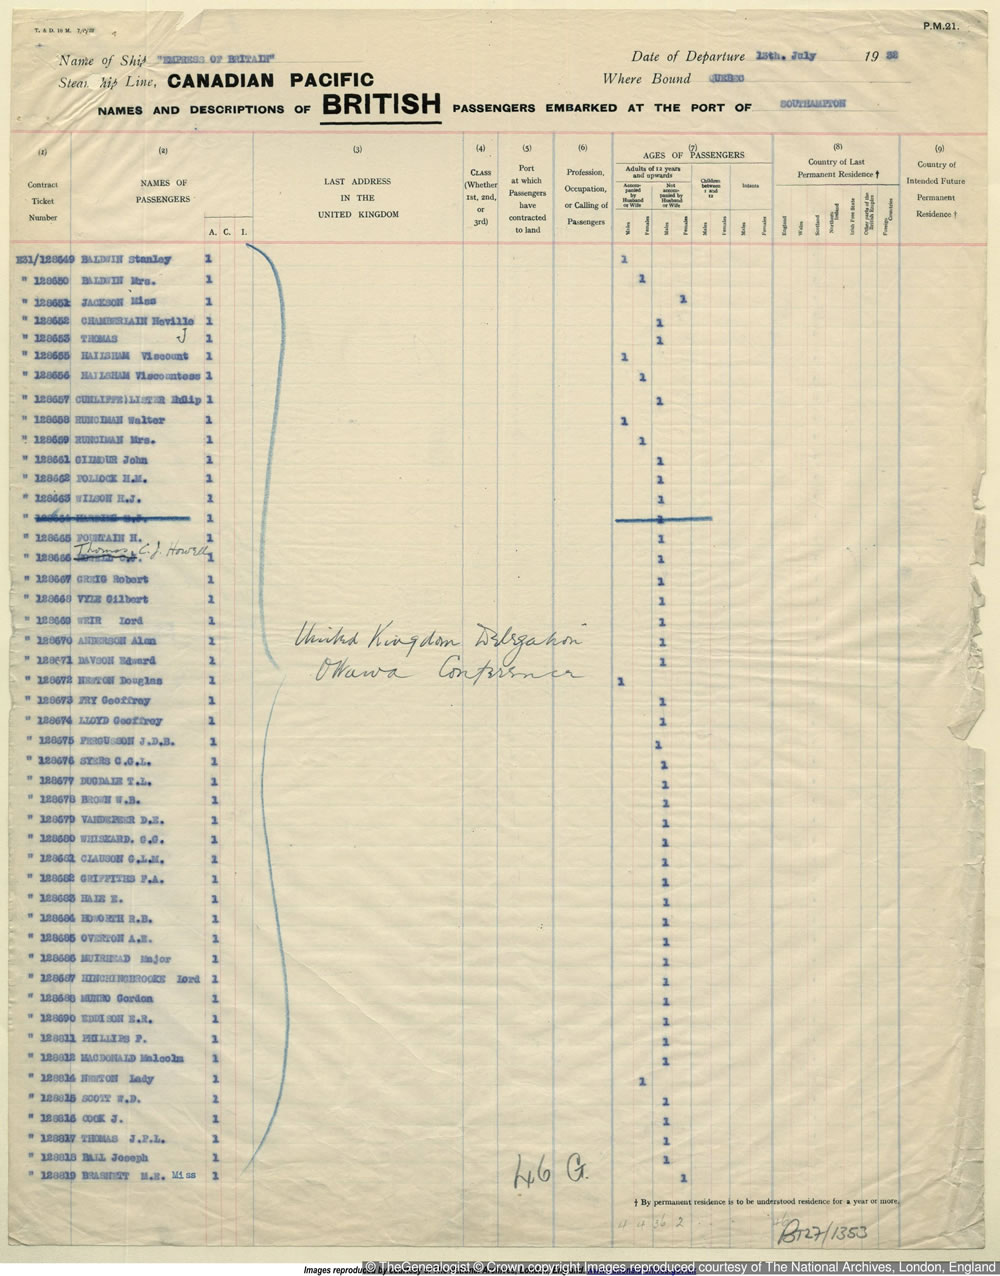 United Kingdom delegation to the Ottawa conference 1932 in the BT27 passenger list